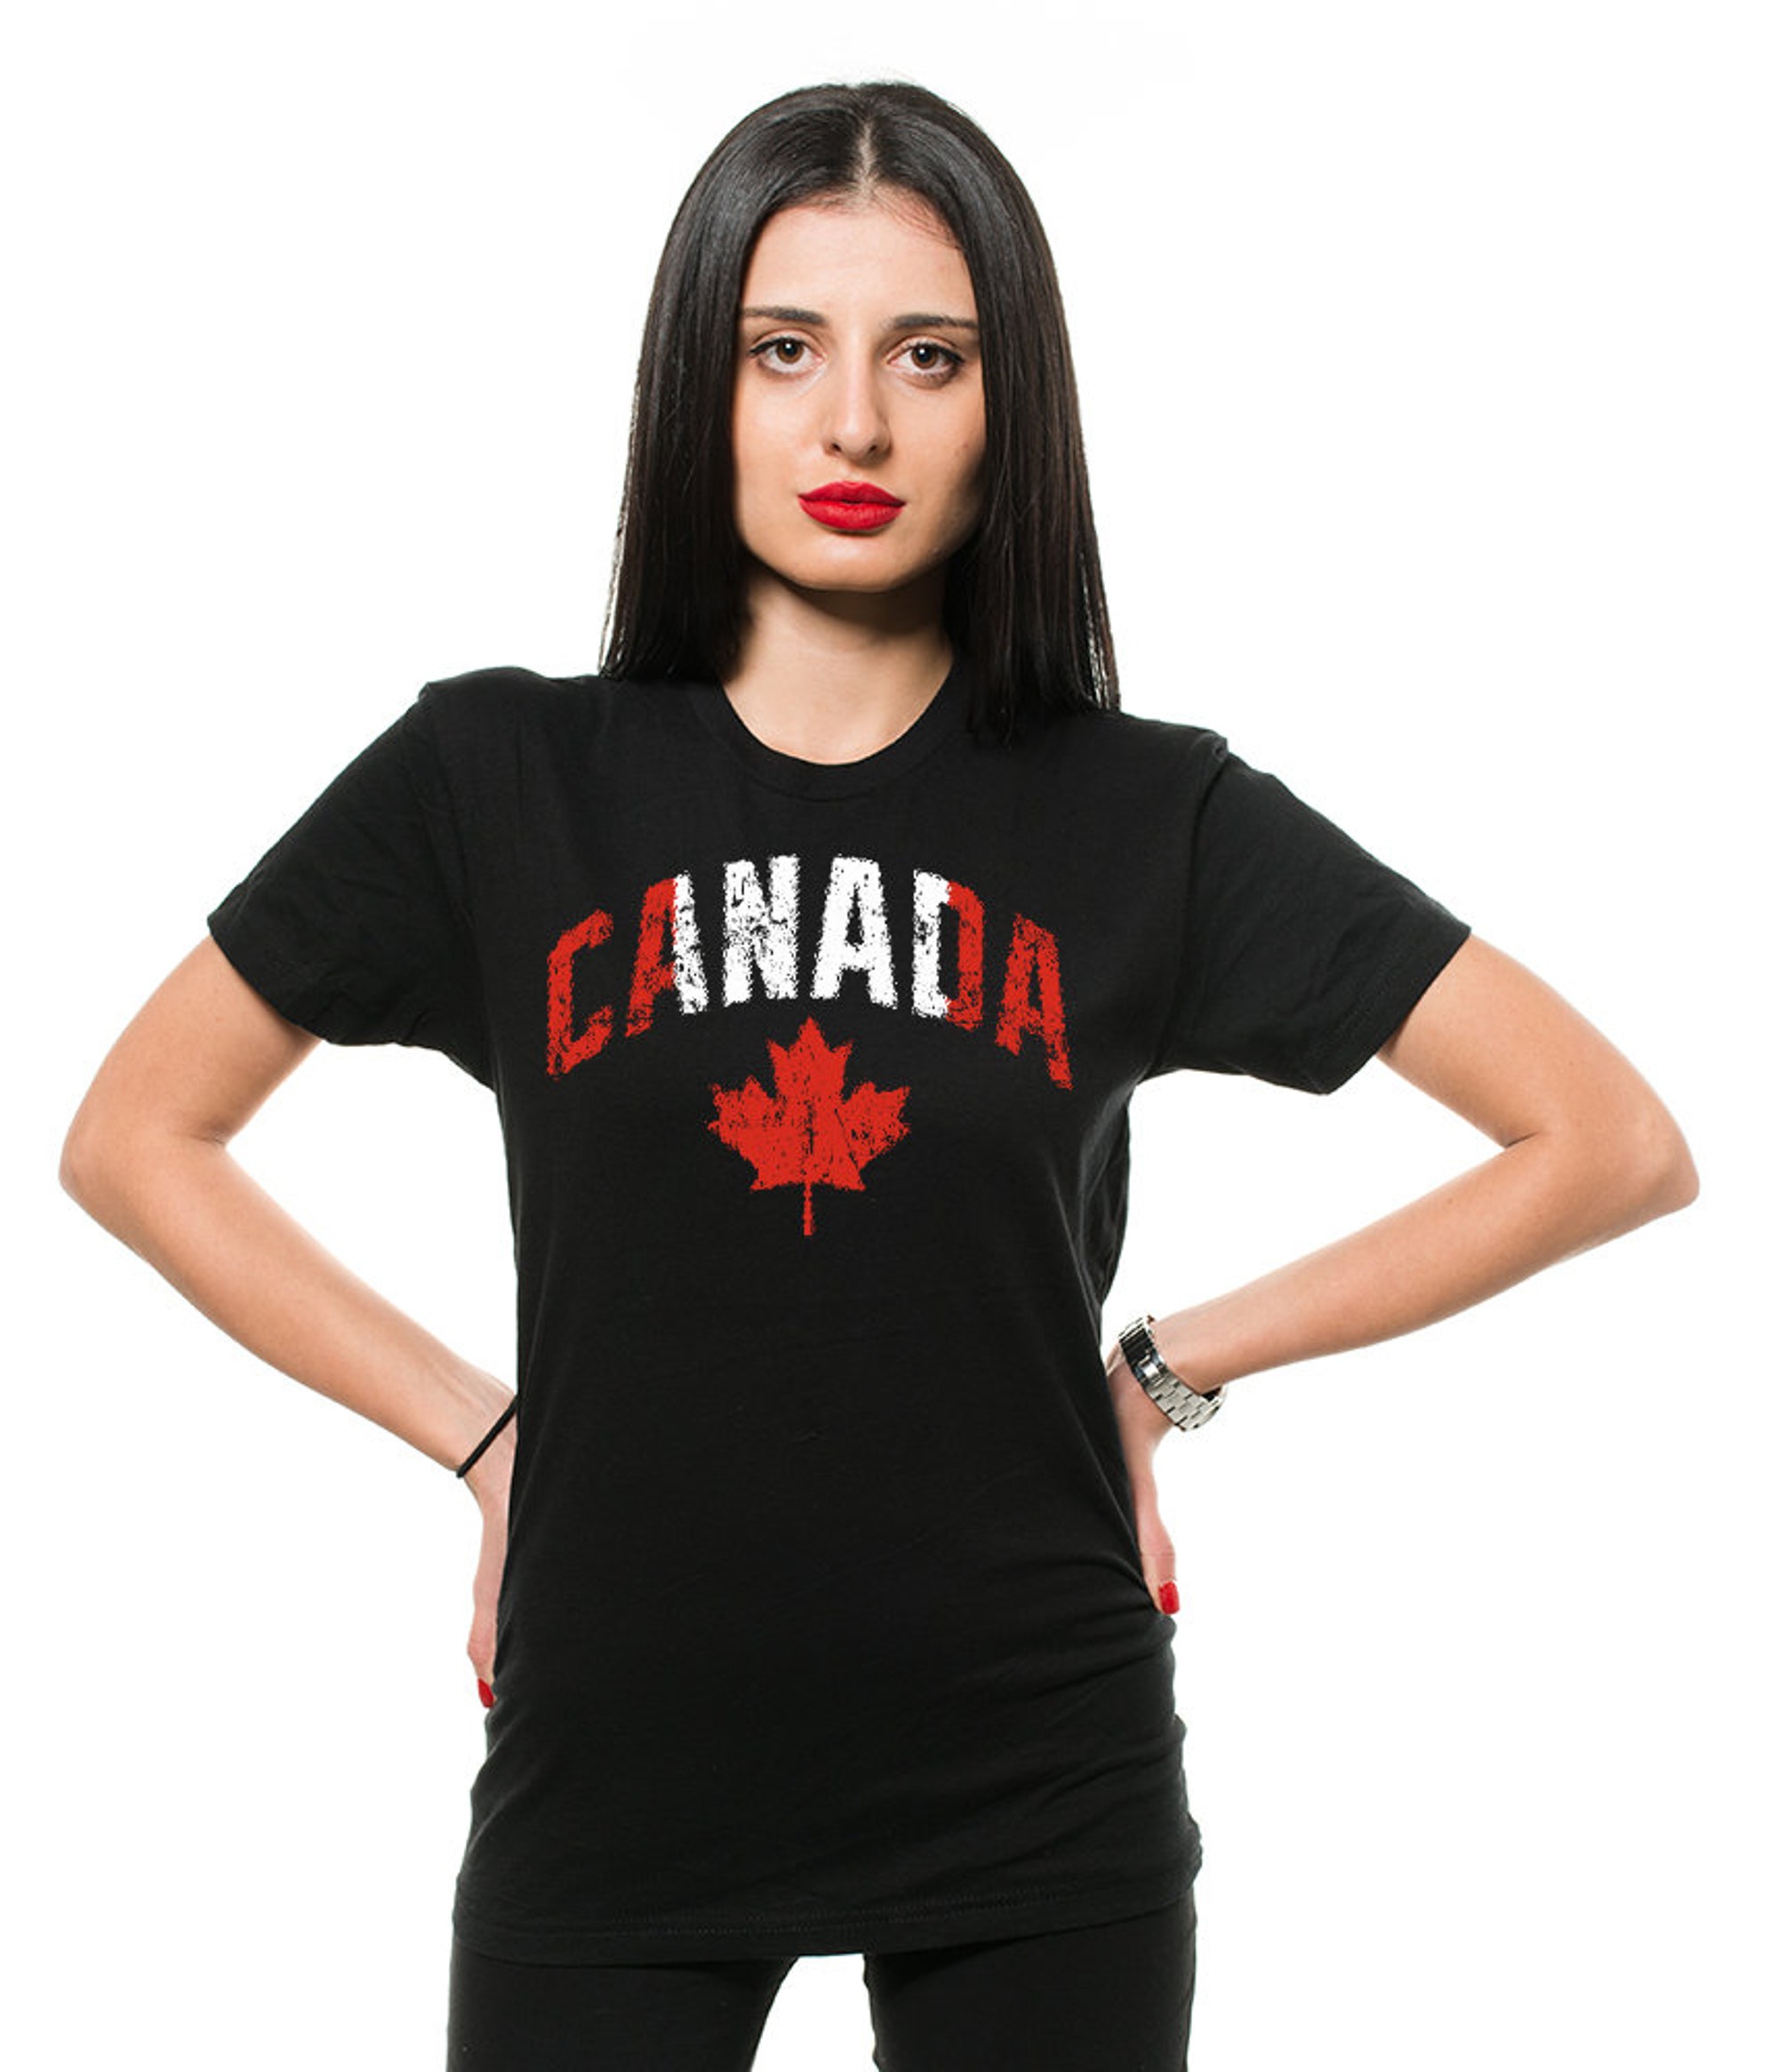 Discover Canada T-shirt Canada Maple Leaf Flag T-shirt Canadian Heritage National Day Mens Unisex Fit T-shirt